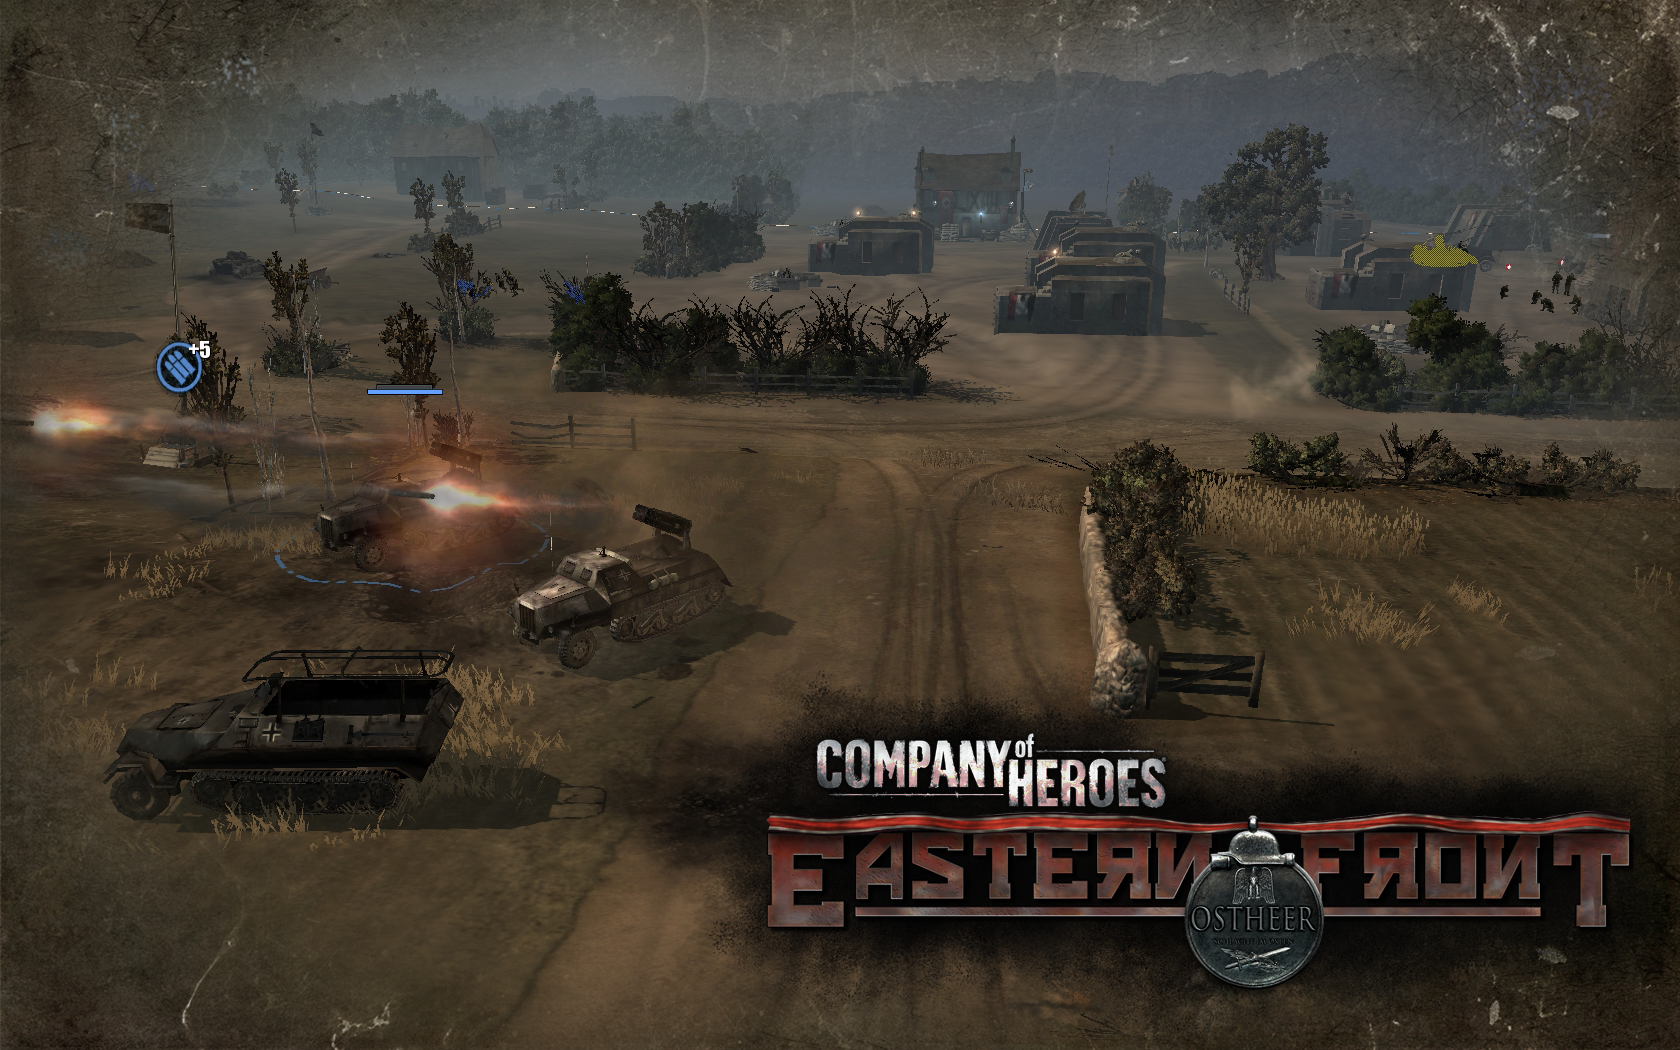 Company of heroes maps for steam фото 80